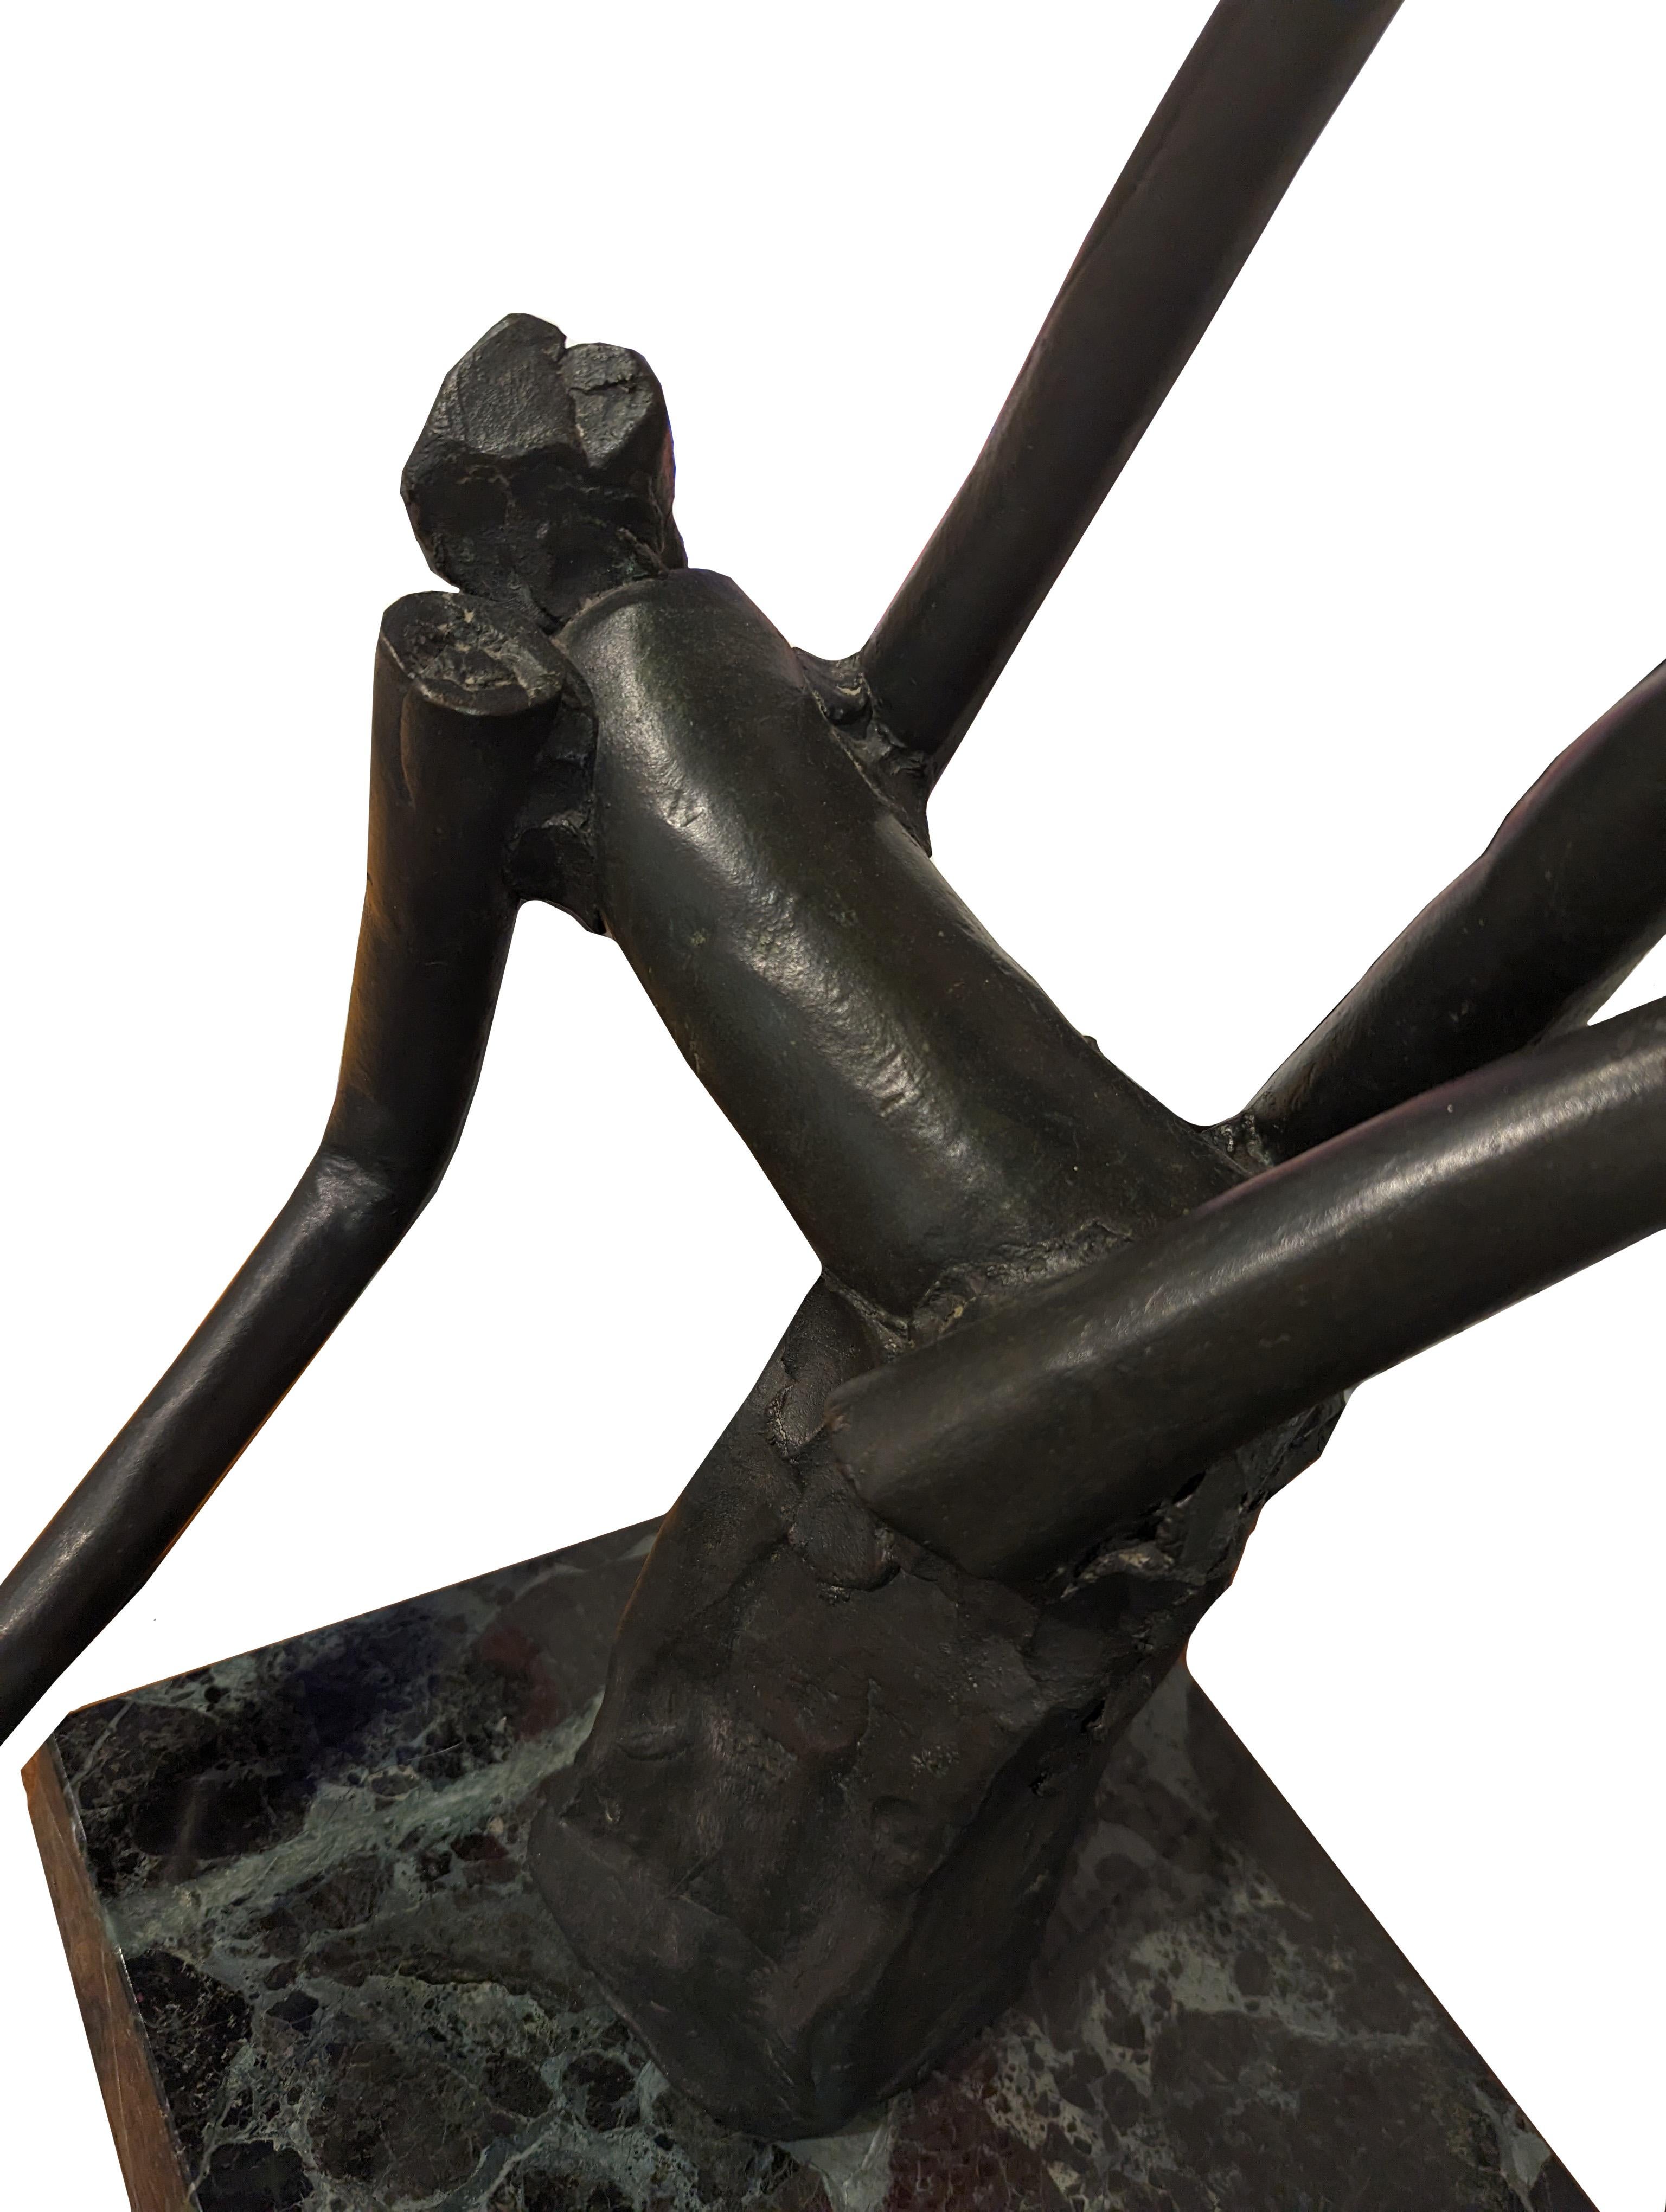 Modern abstract sculpture of a woman and goat by renowned artist Reuben Nakian. The work features a female nymph figure lying back as a goat figure approaches in Nakian's iconic blocky style. The bronze figures are attached to a green toned marble